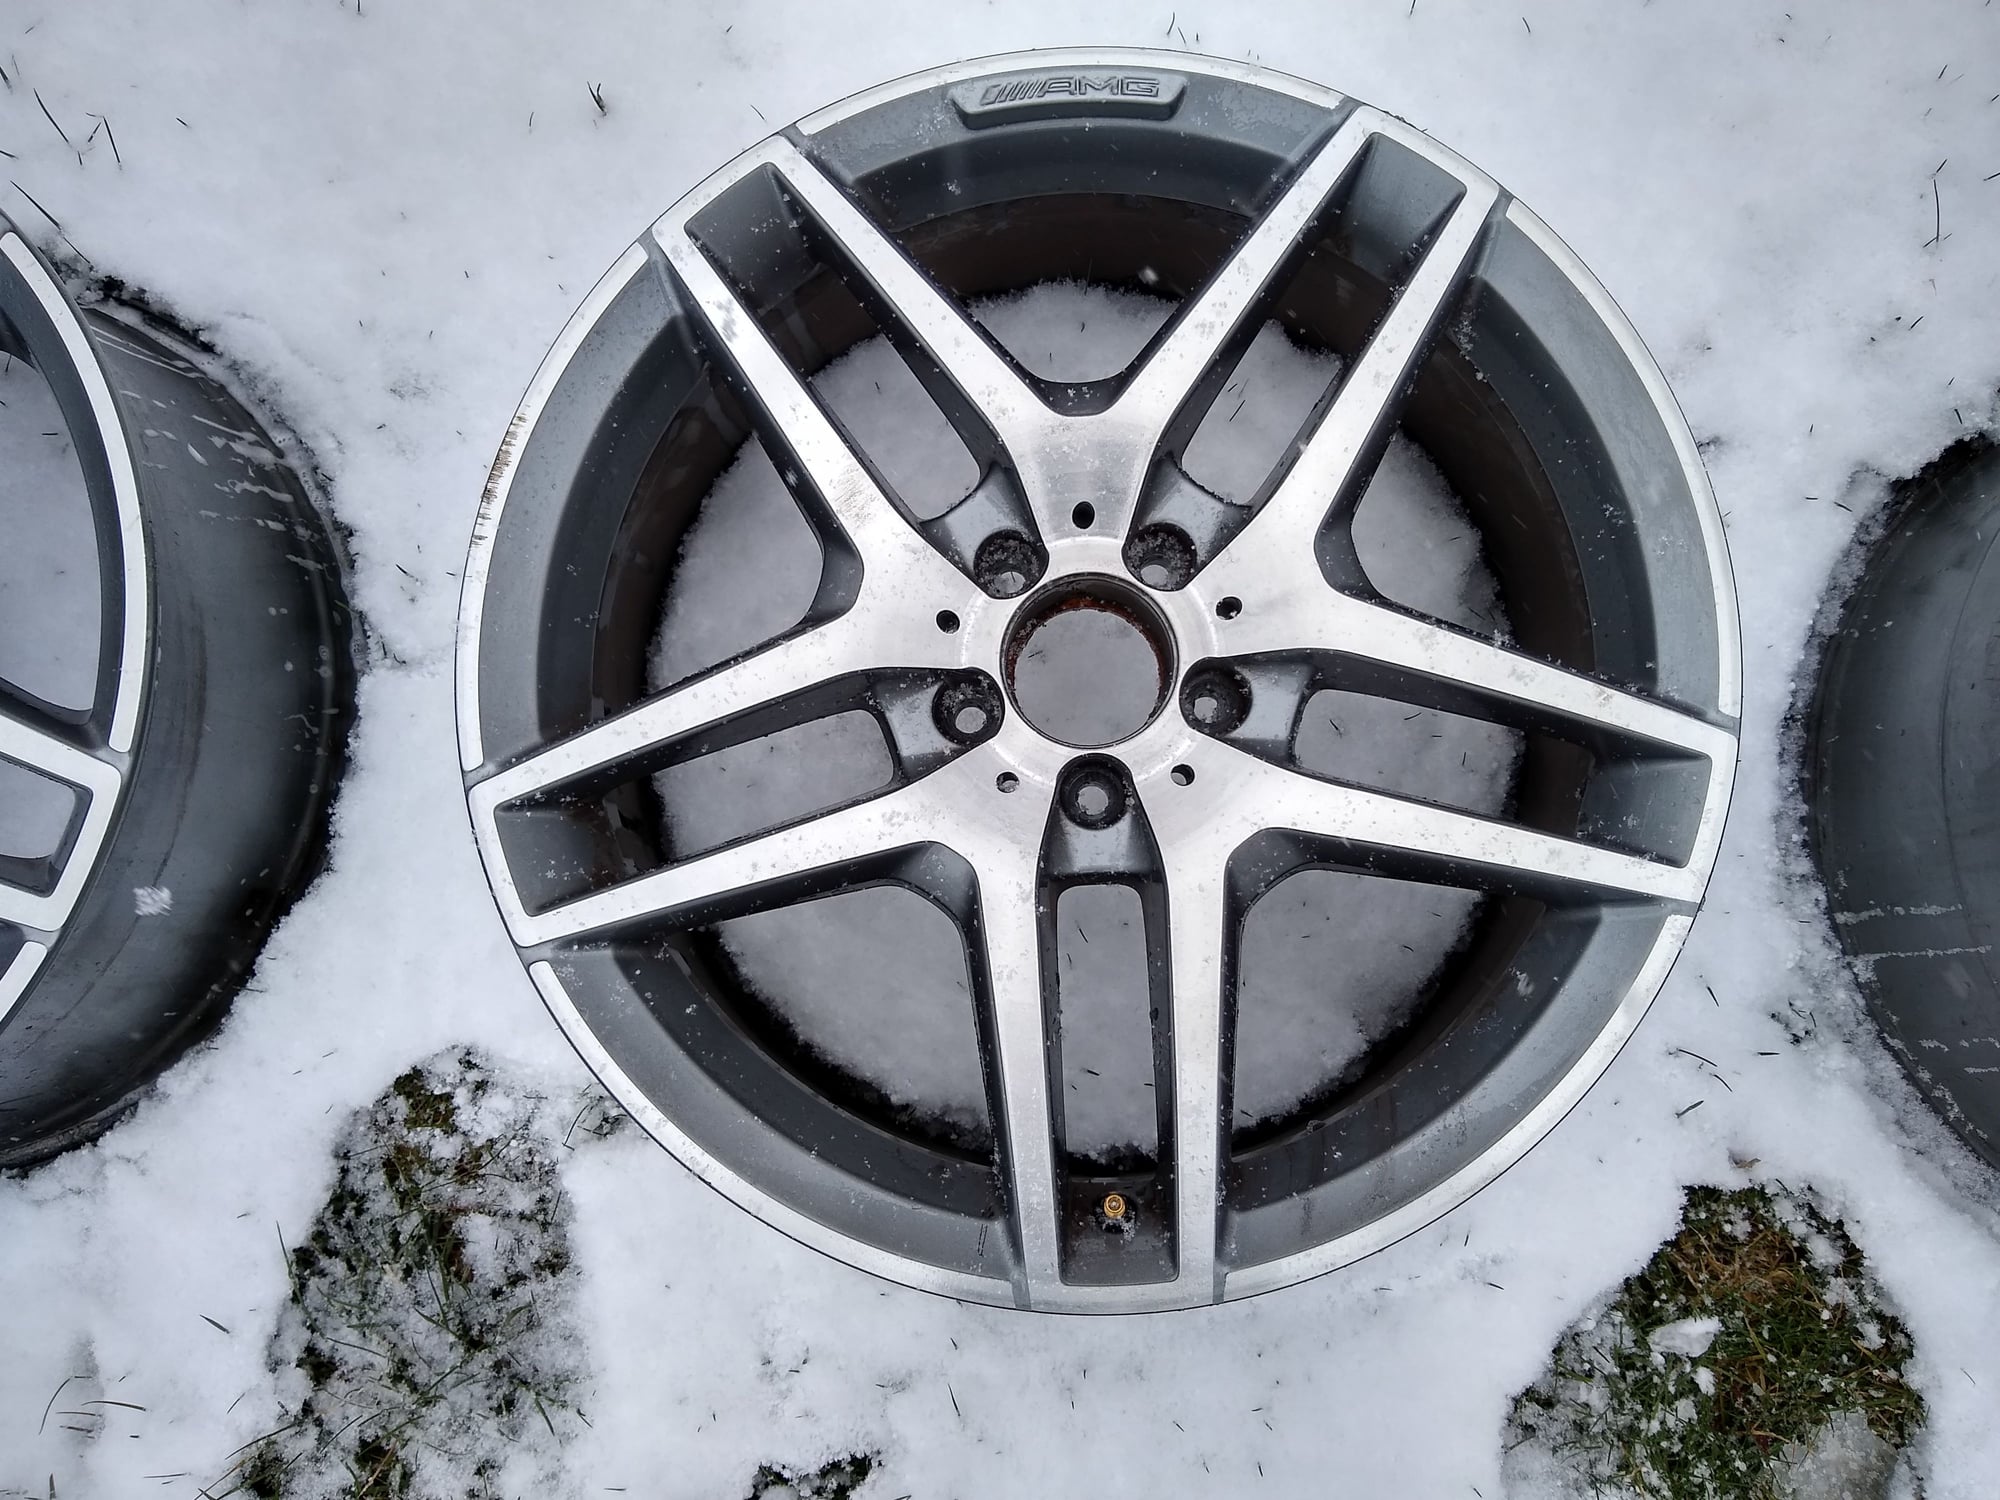 Wheels and Tires/Axles - W222 Mercedes S Class AMG WHEELS FOR SALE. OEM MADE IN GERMANY AMG WHEELS - Used - 2014 to 2020 Mercedes-Benz S550 - 2014 to 2020 Mercedes-Benz S63 AMG - Cleveland, OH 44101, United States